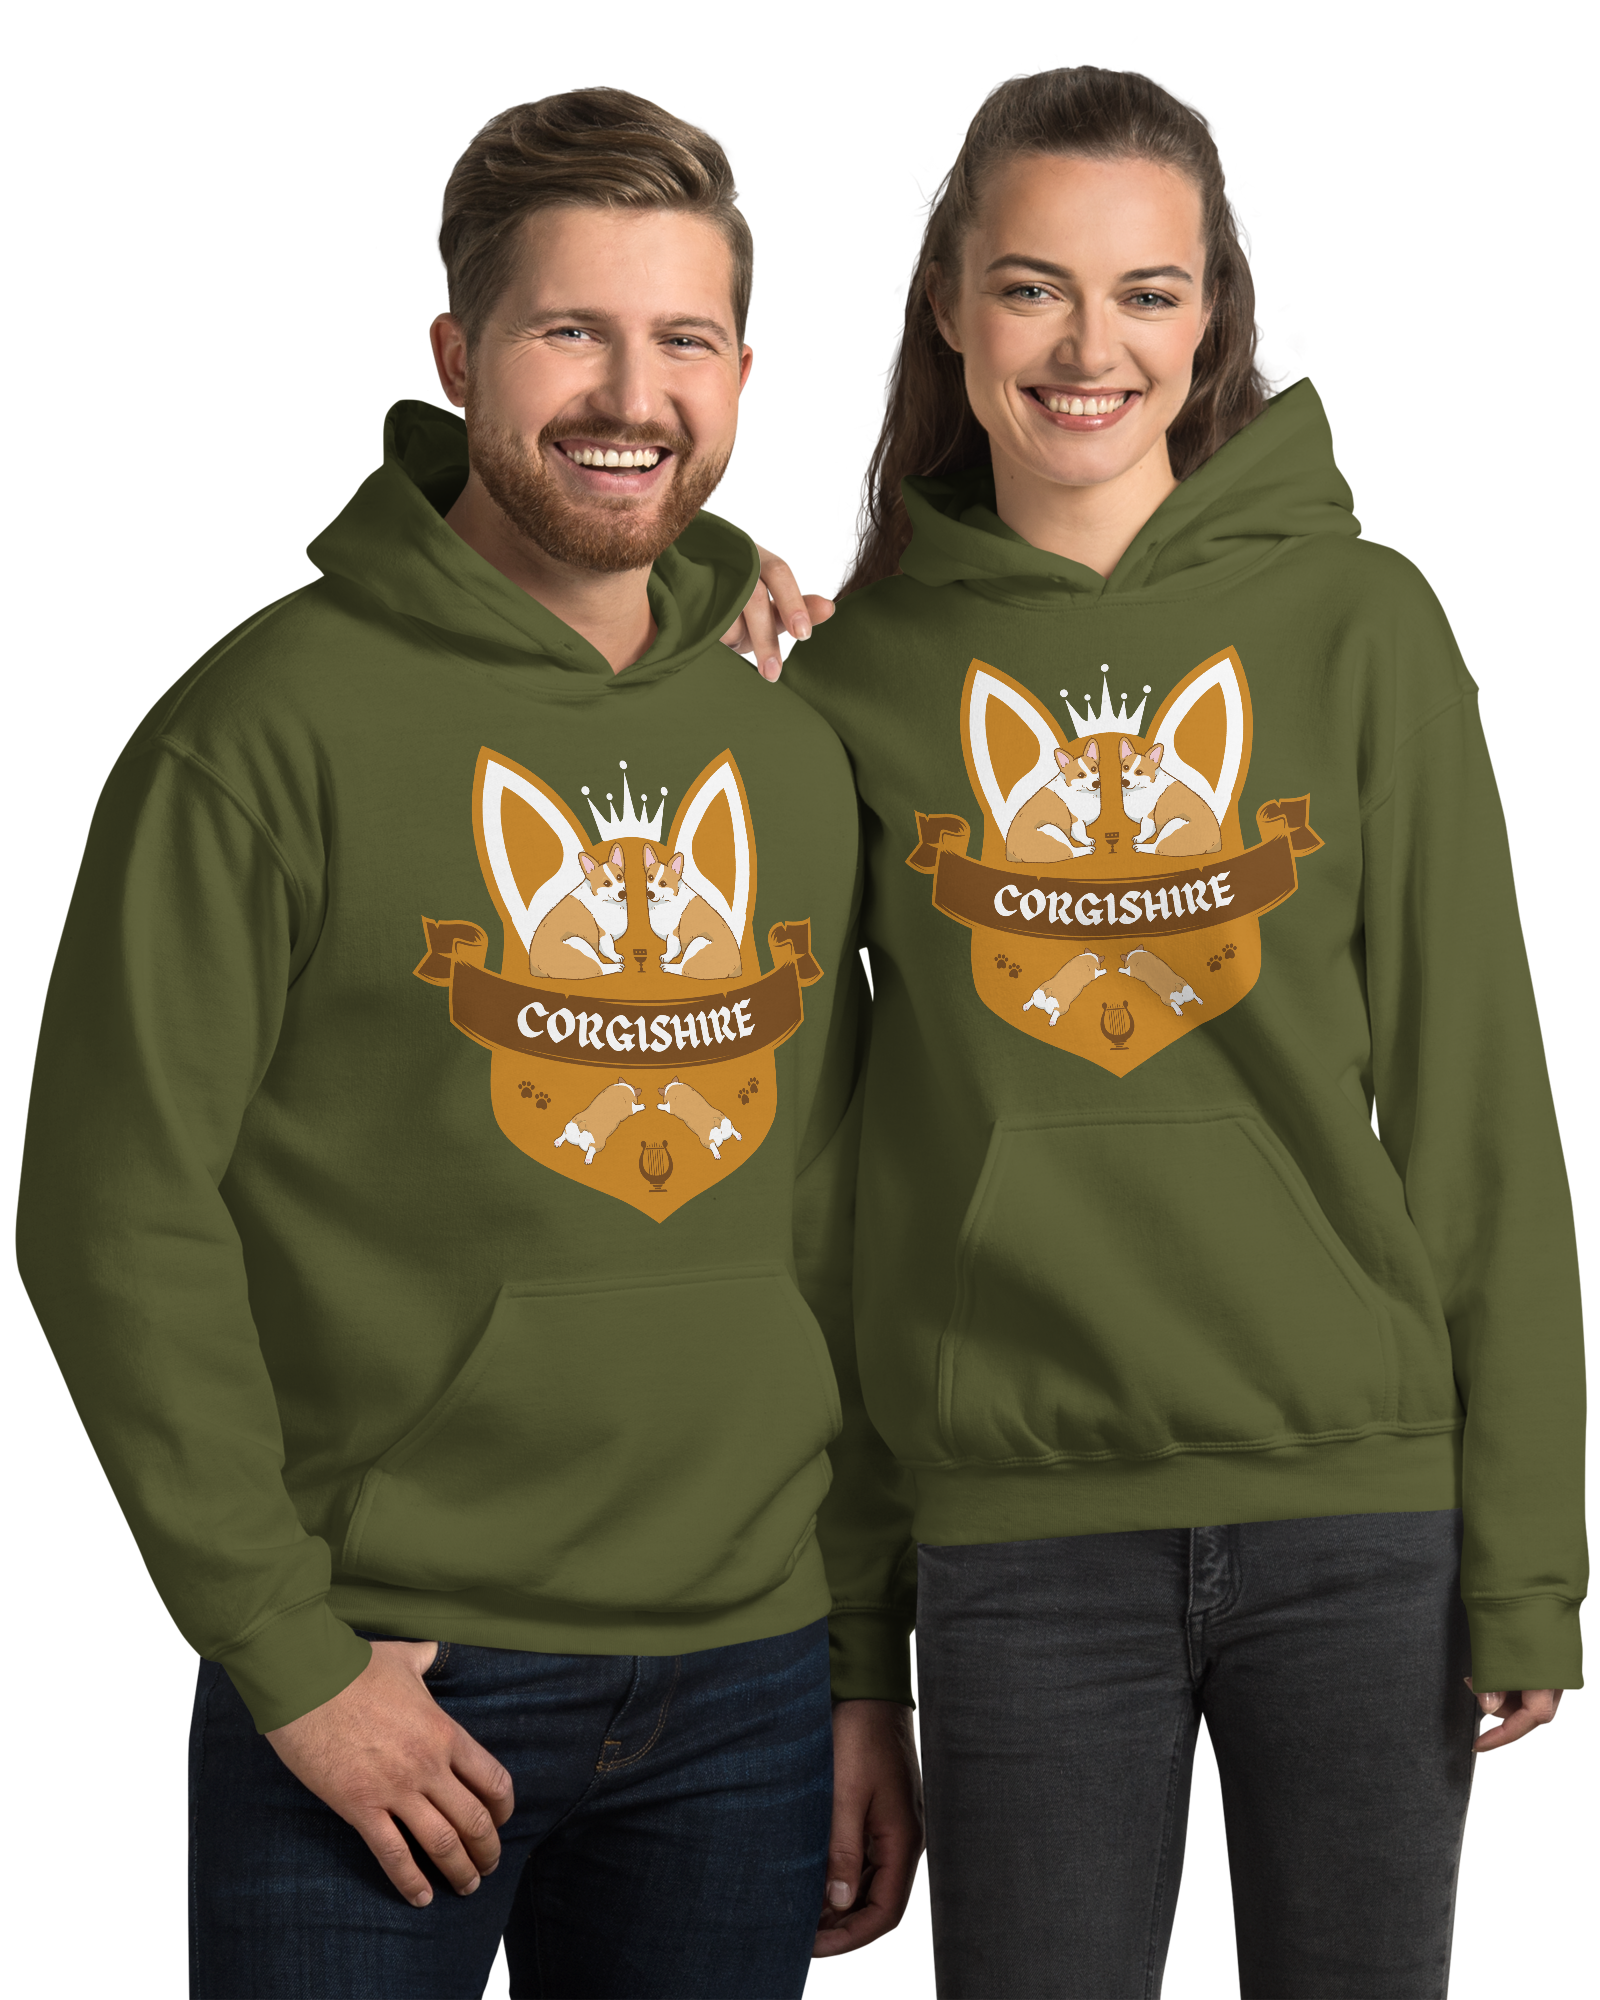 Corgishire is filled with all manner of corgis, and Corgishire keepsakes remind us of this magical place. Our fun & fabulous Corgishire clothes and gifts are beloved by corgi lovers